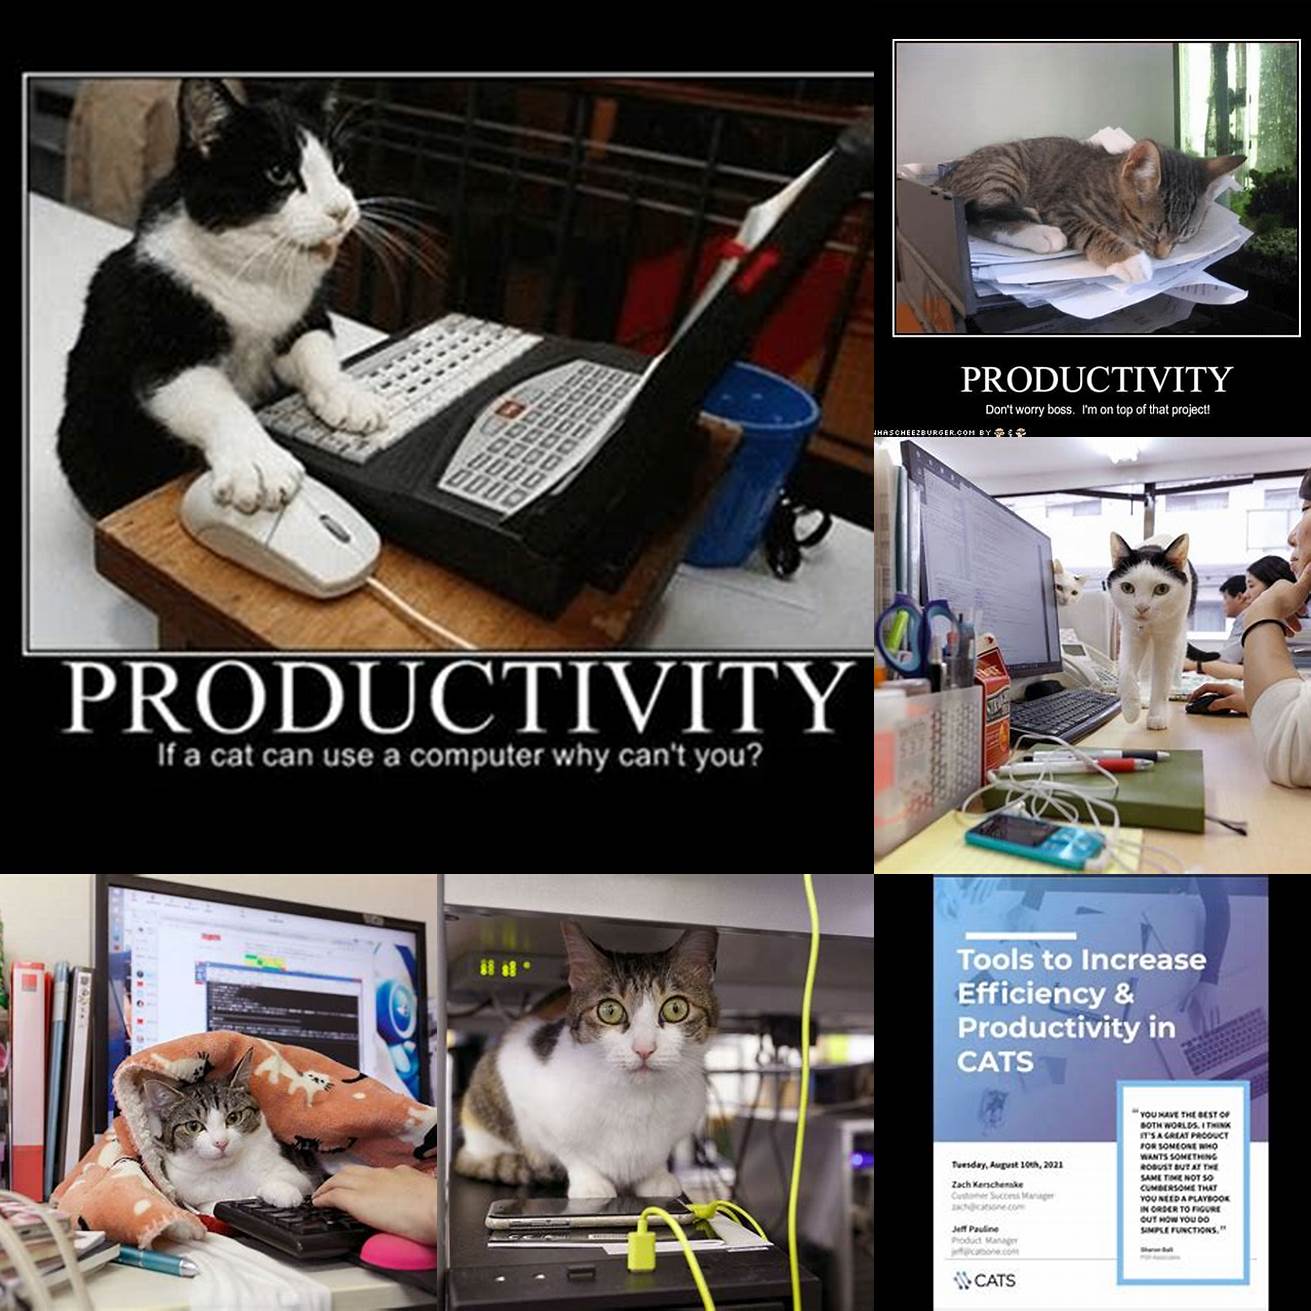 Increased productivity